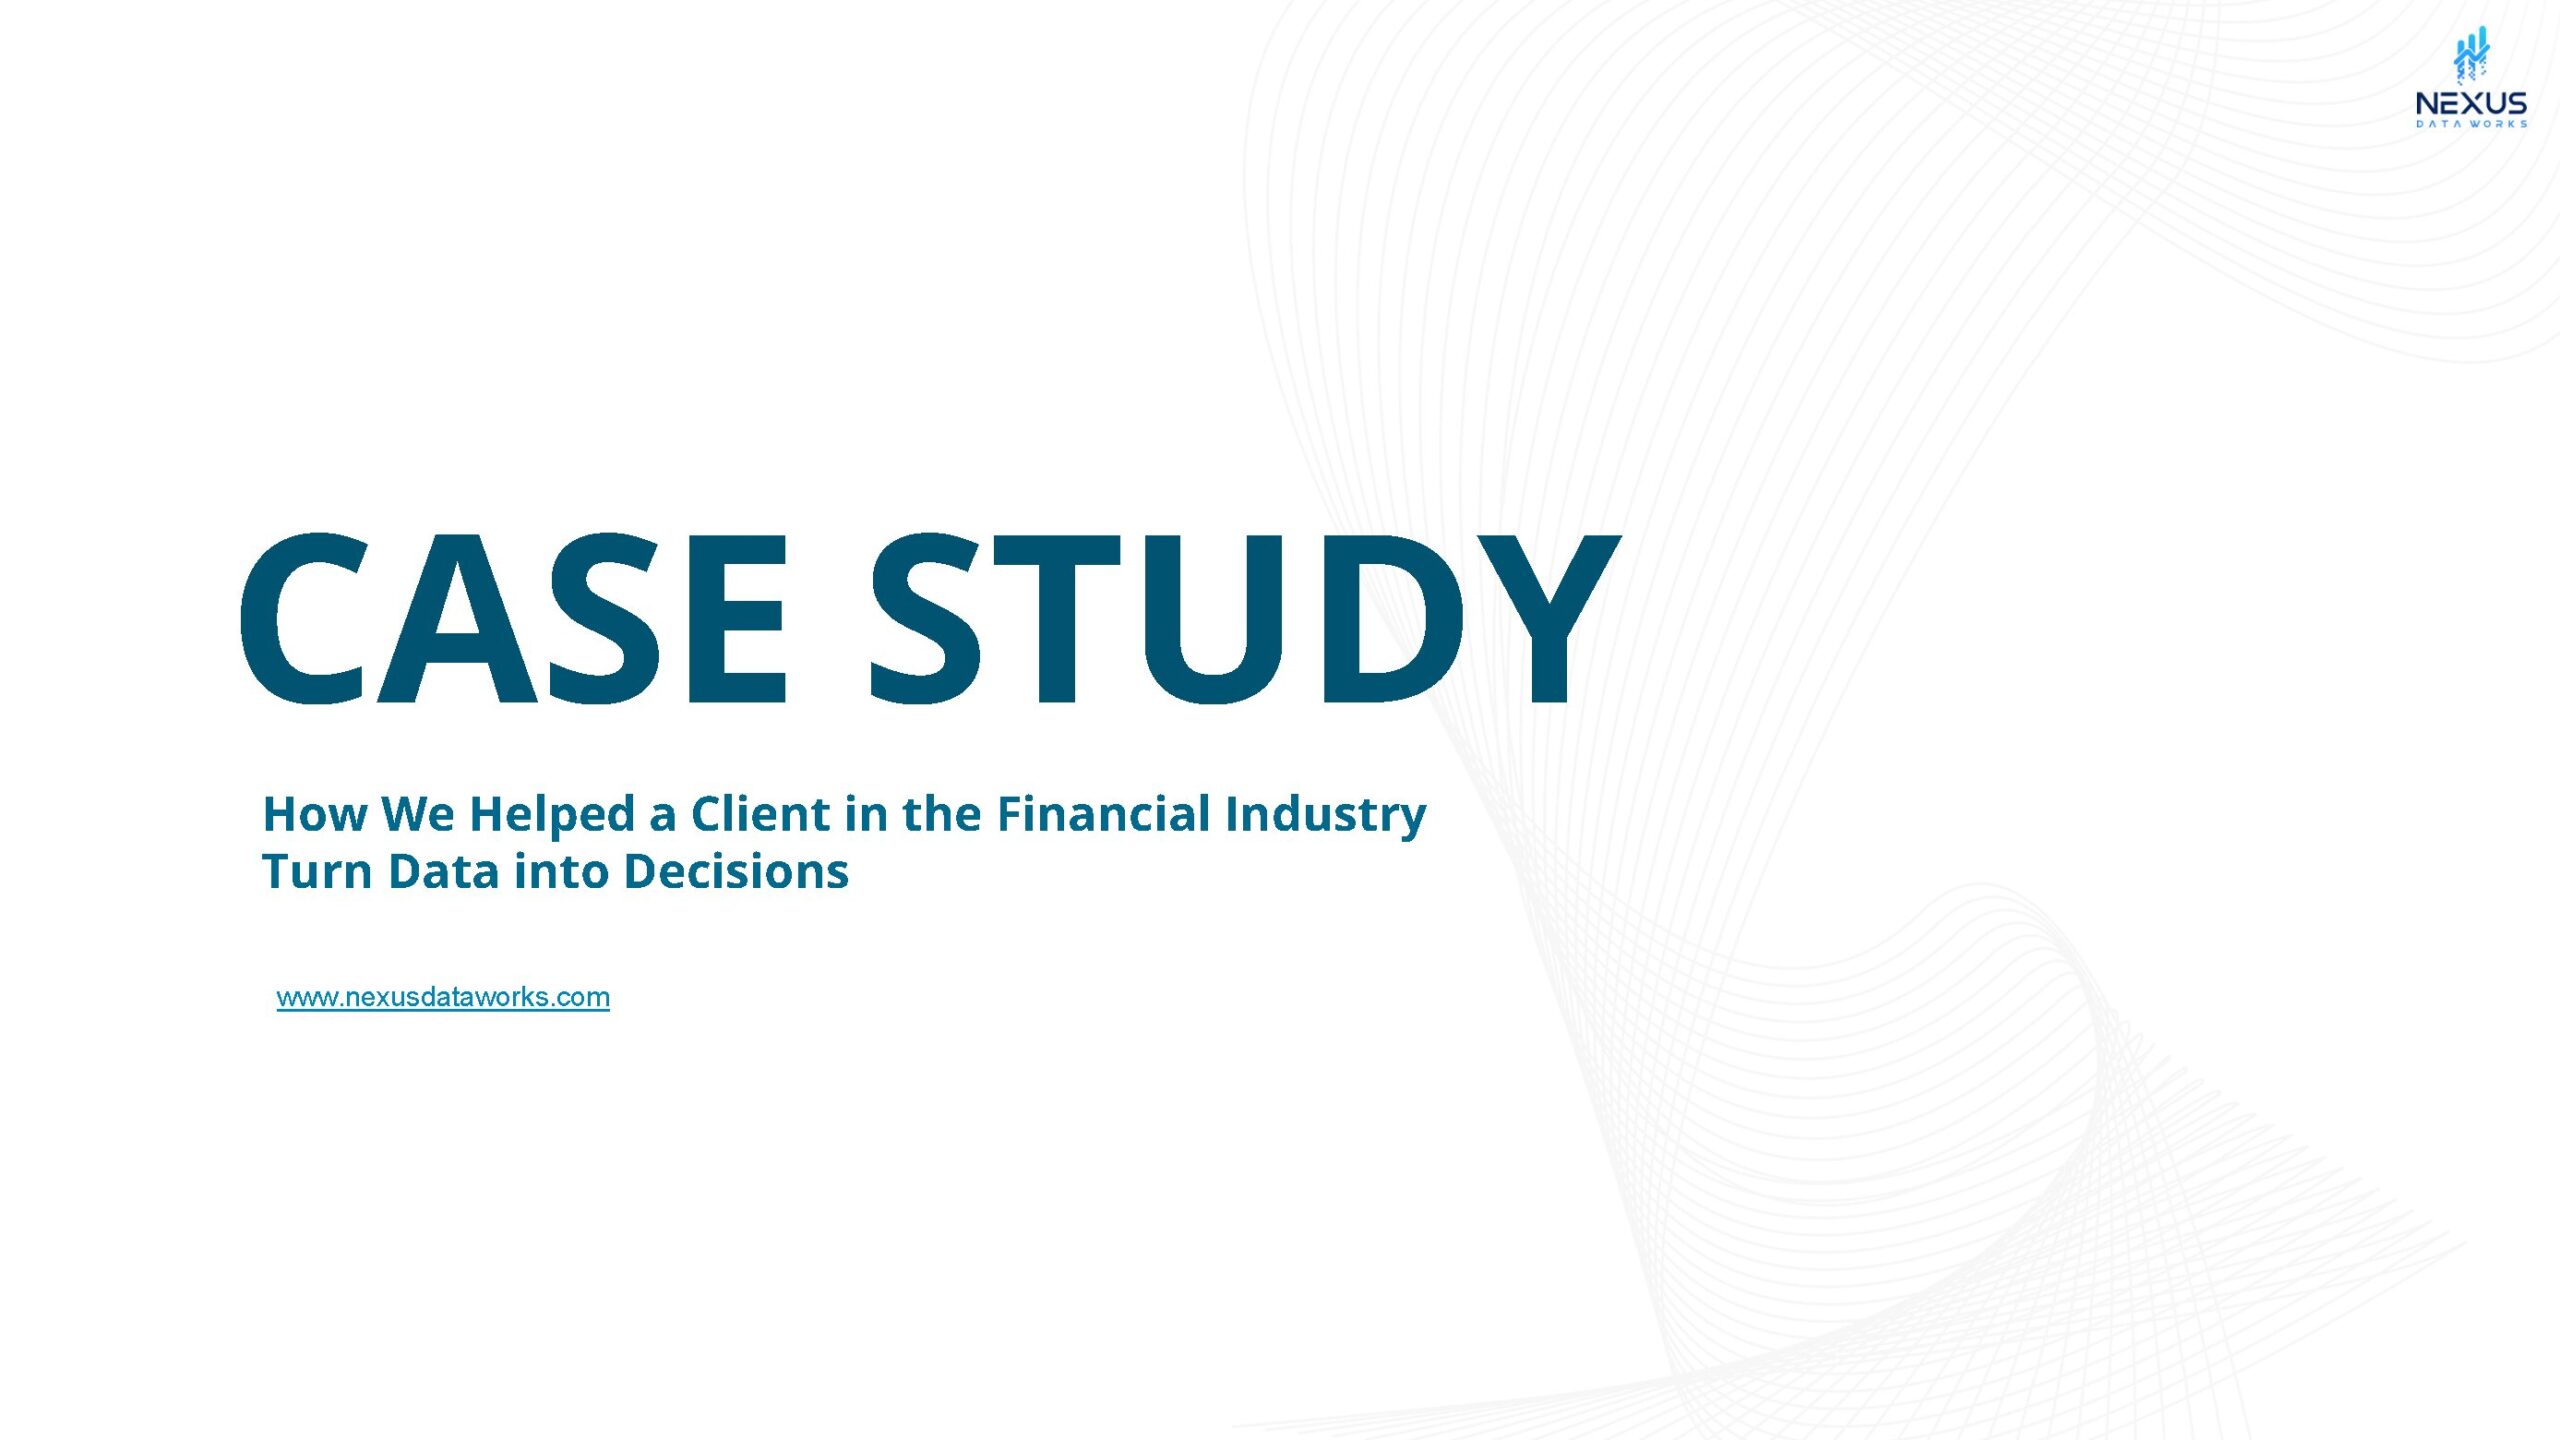 CASE STUDY - How We Helped a Client in the Financial Industry - Nexus Data Works LLC